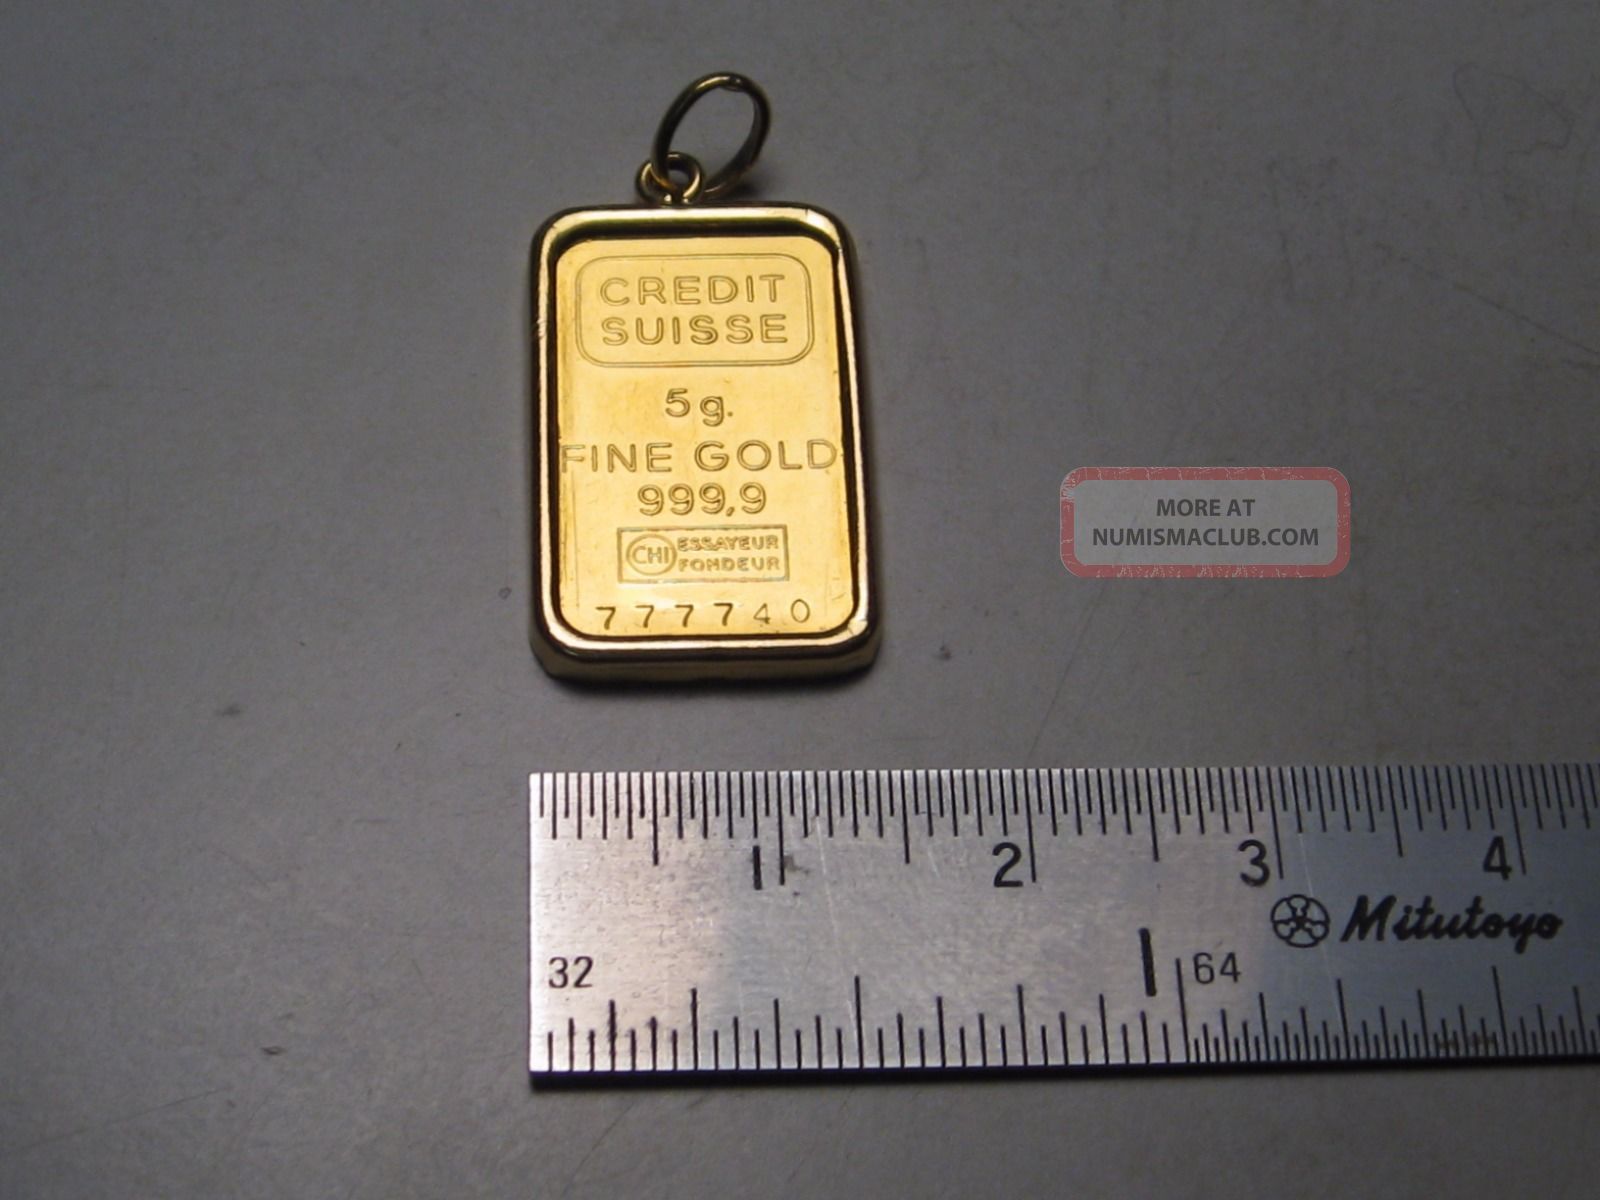 how to check serial number of credit suisse gold bar